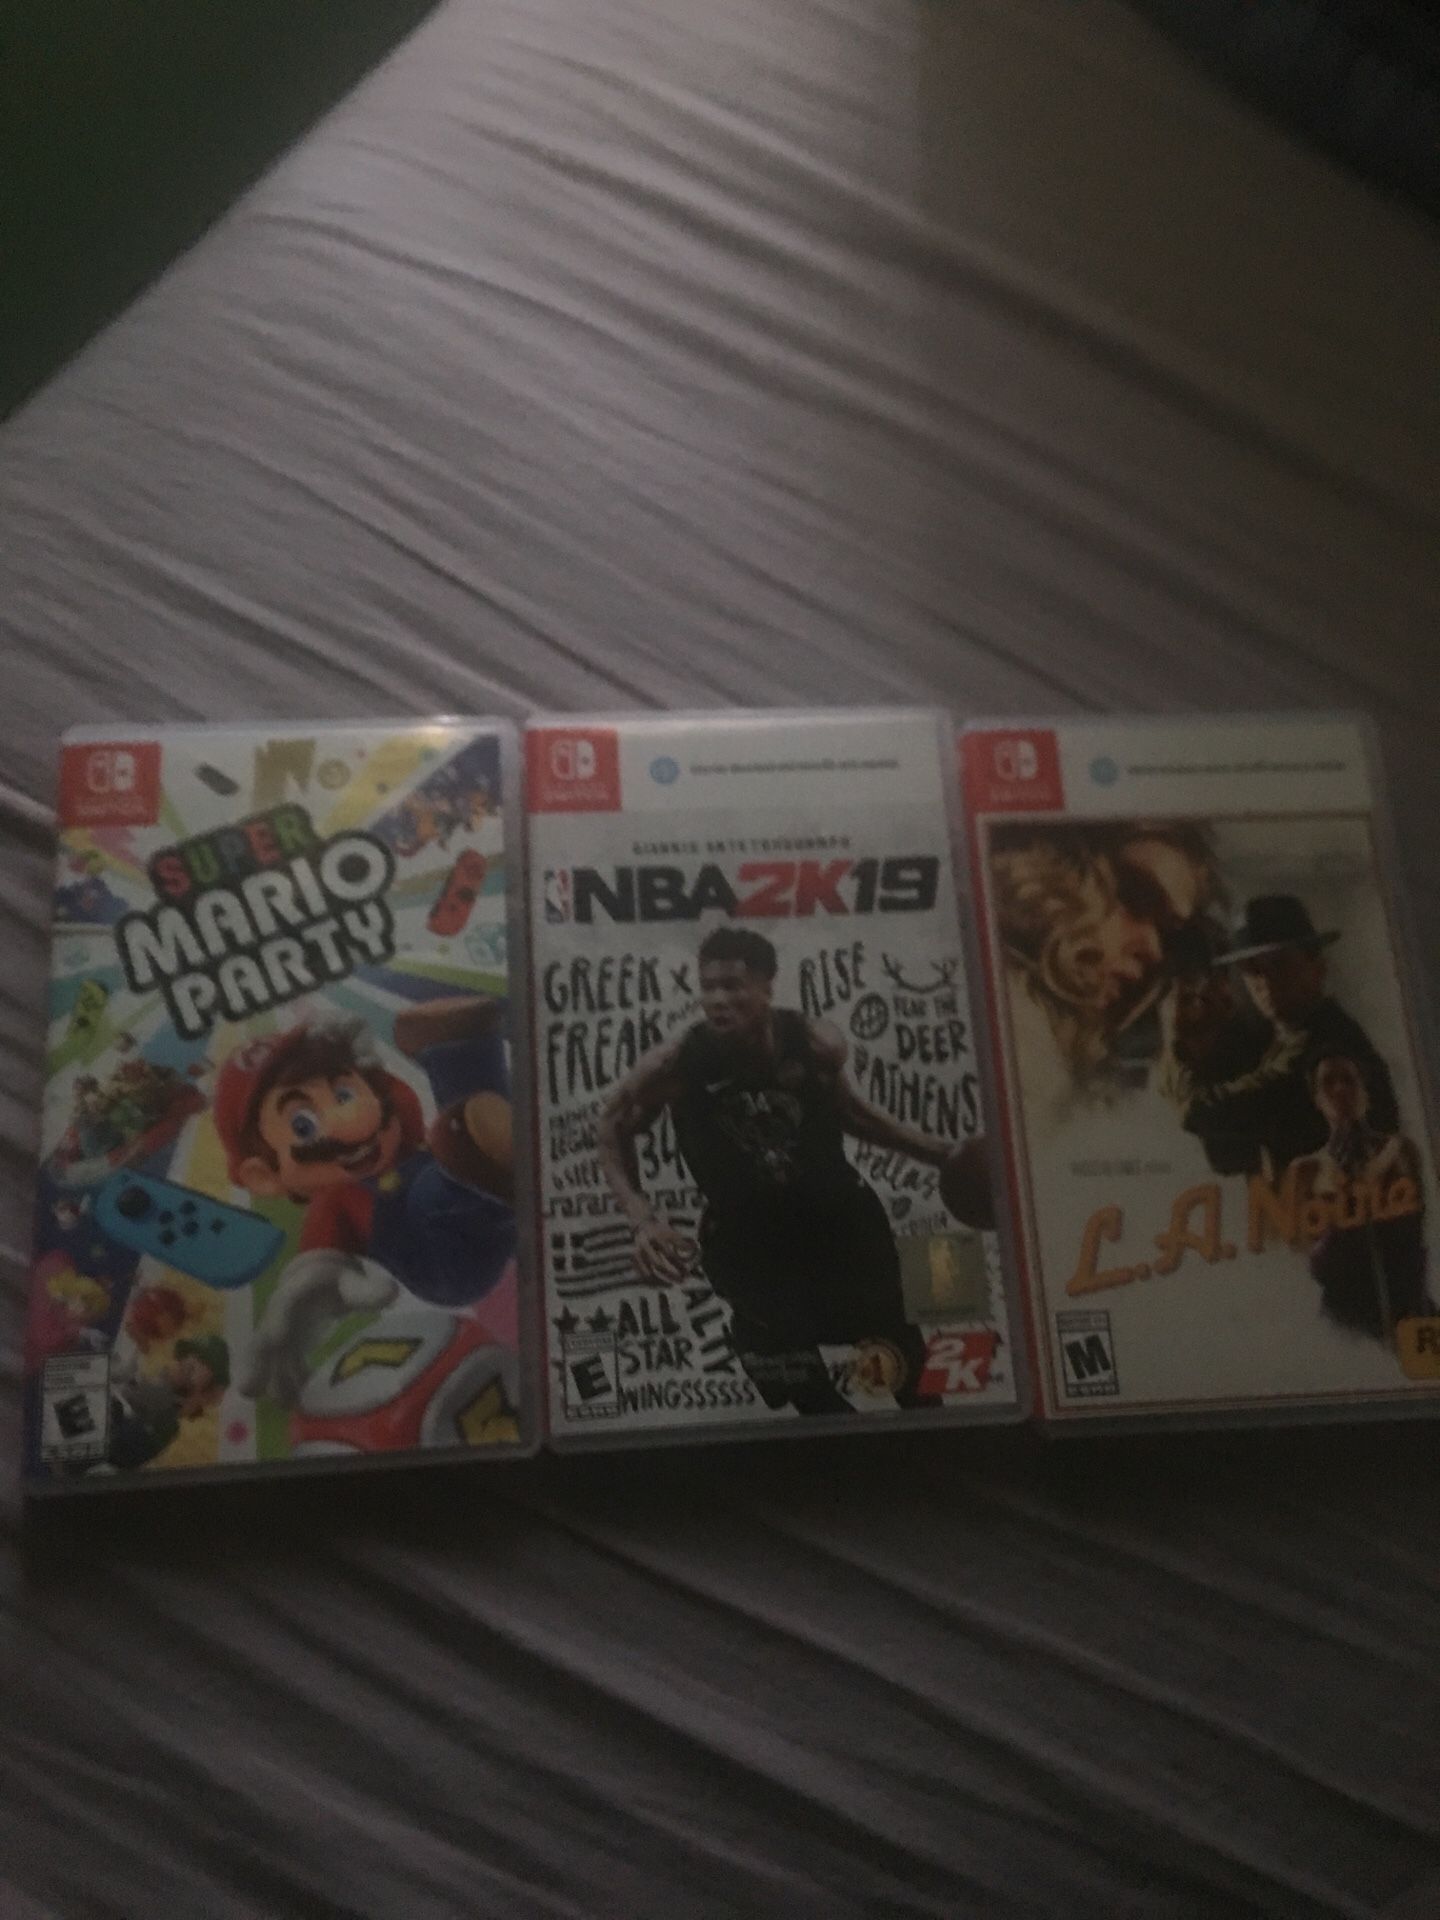 Selling Switch games